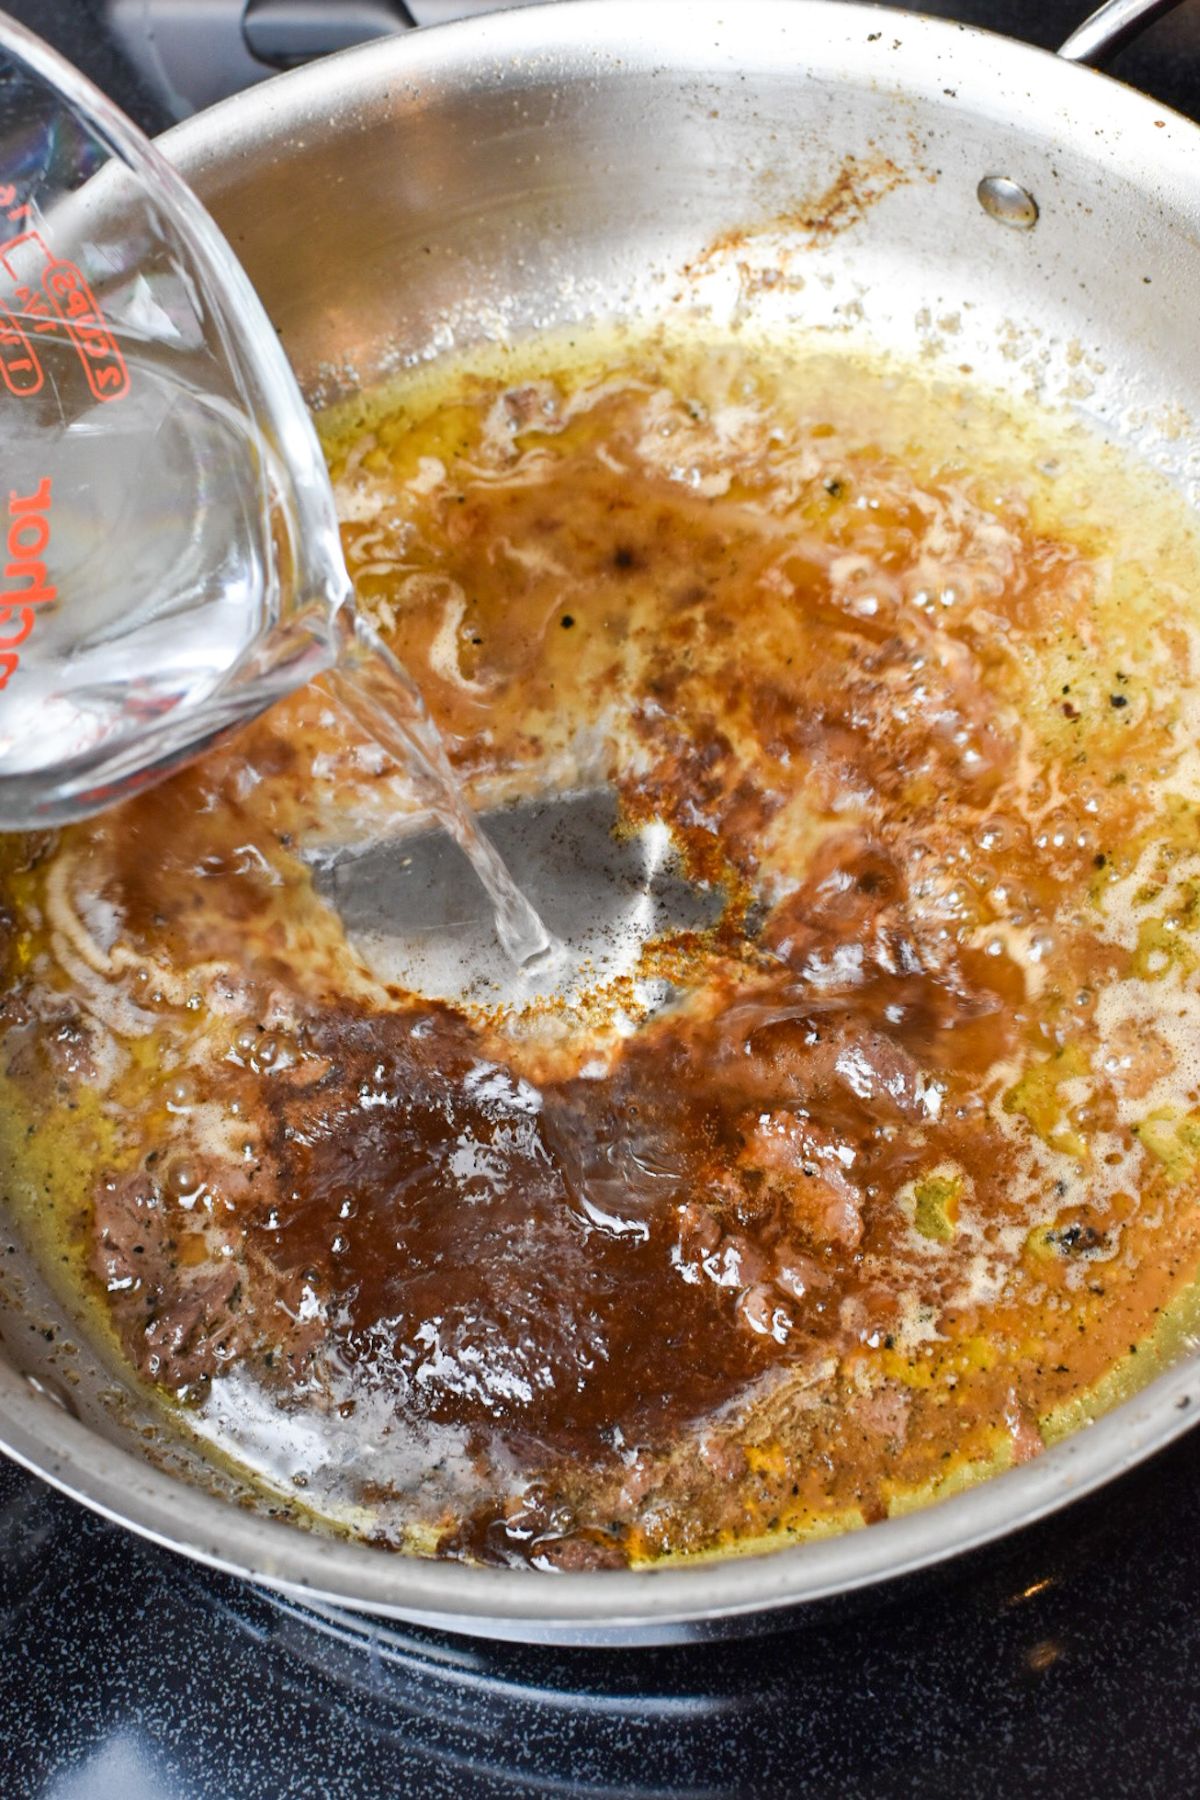 Adding water and beef bouillon to the beef drippings to make gravy.